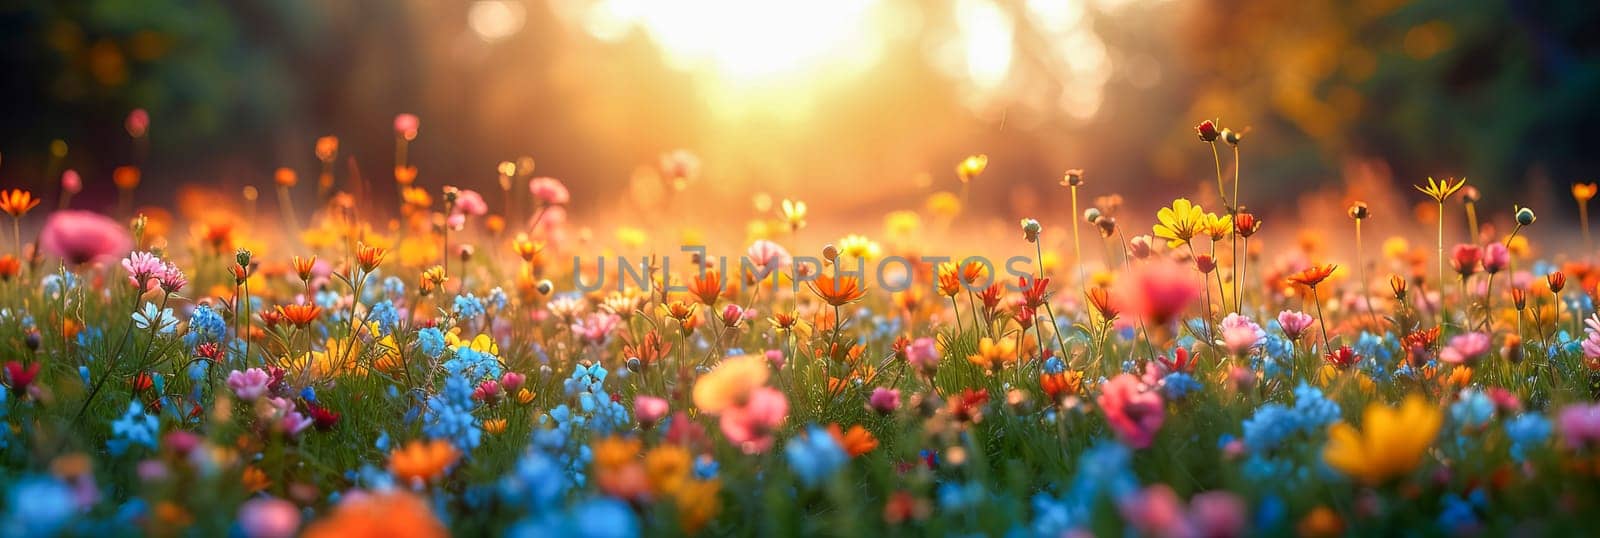 Banner with place for text summer wildflowers in a meadow on a blurred landscape background in sunlight. Place for text.